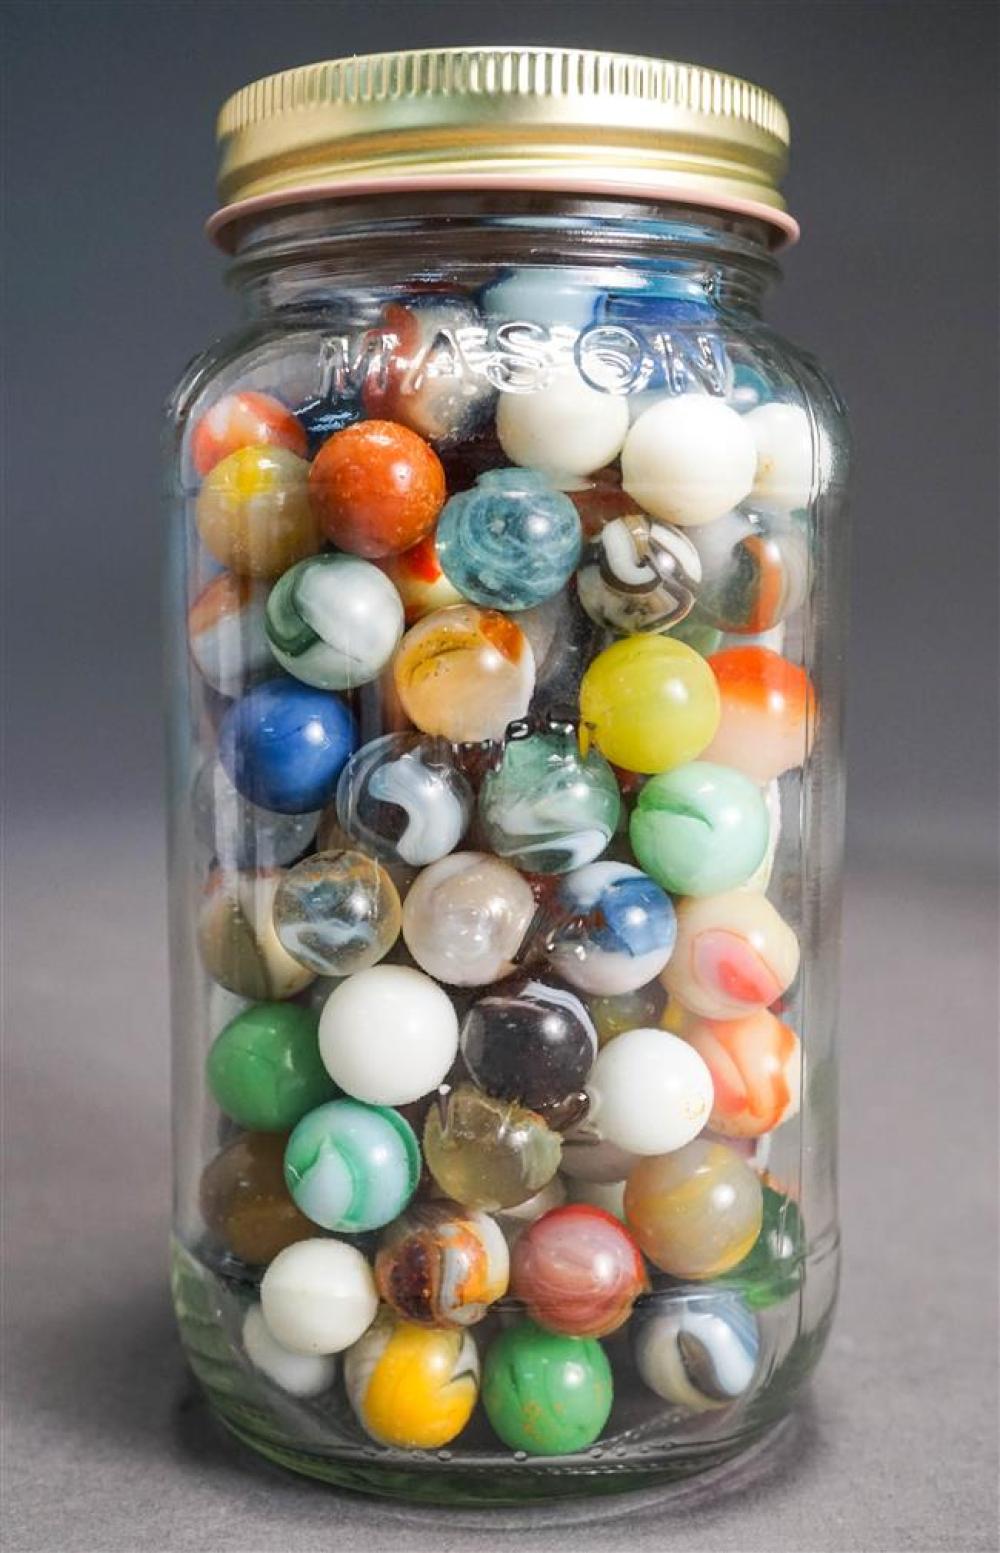 COLLECTION OF MARBLESCollection